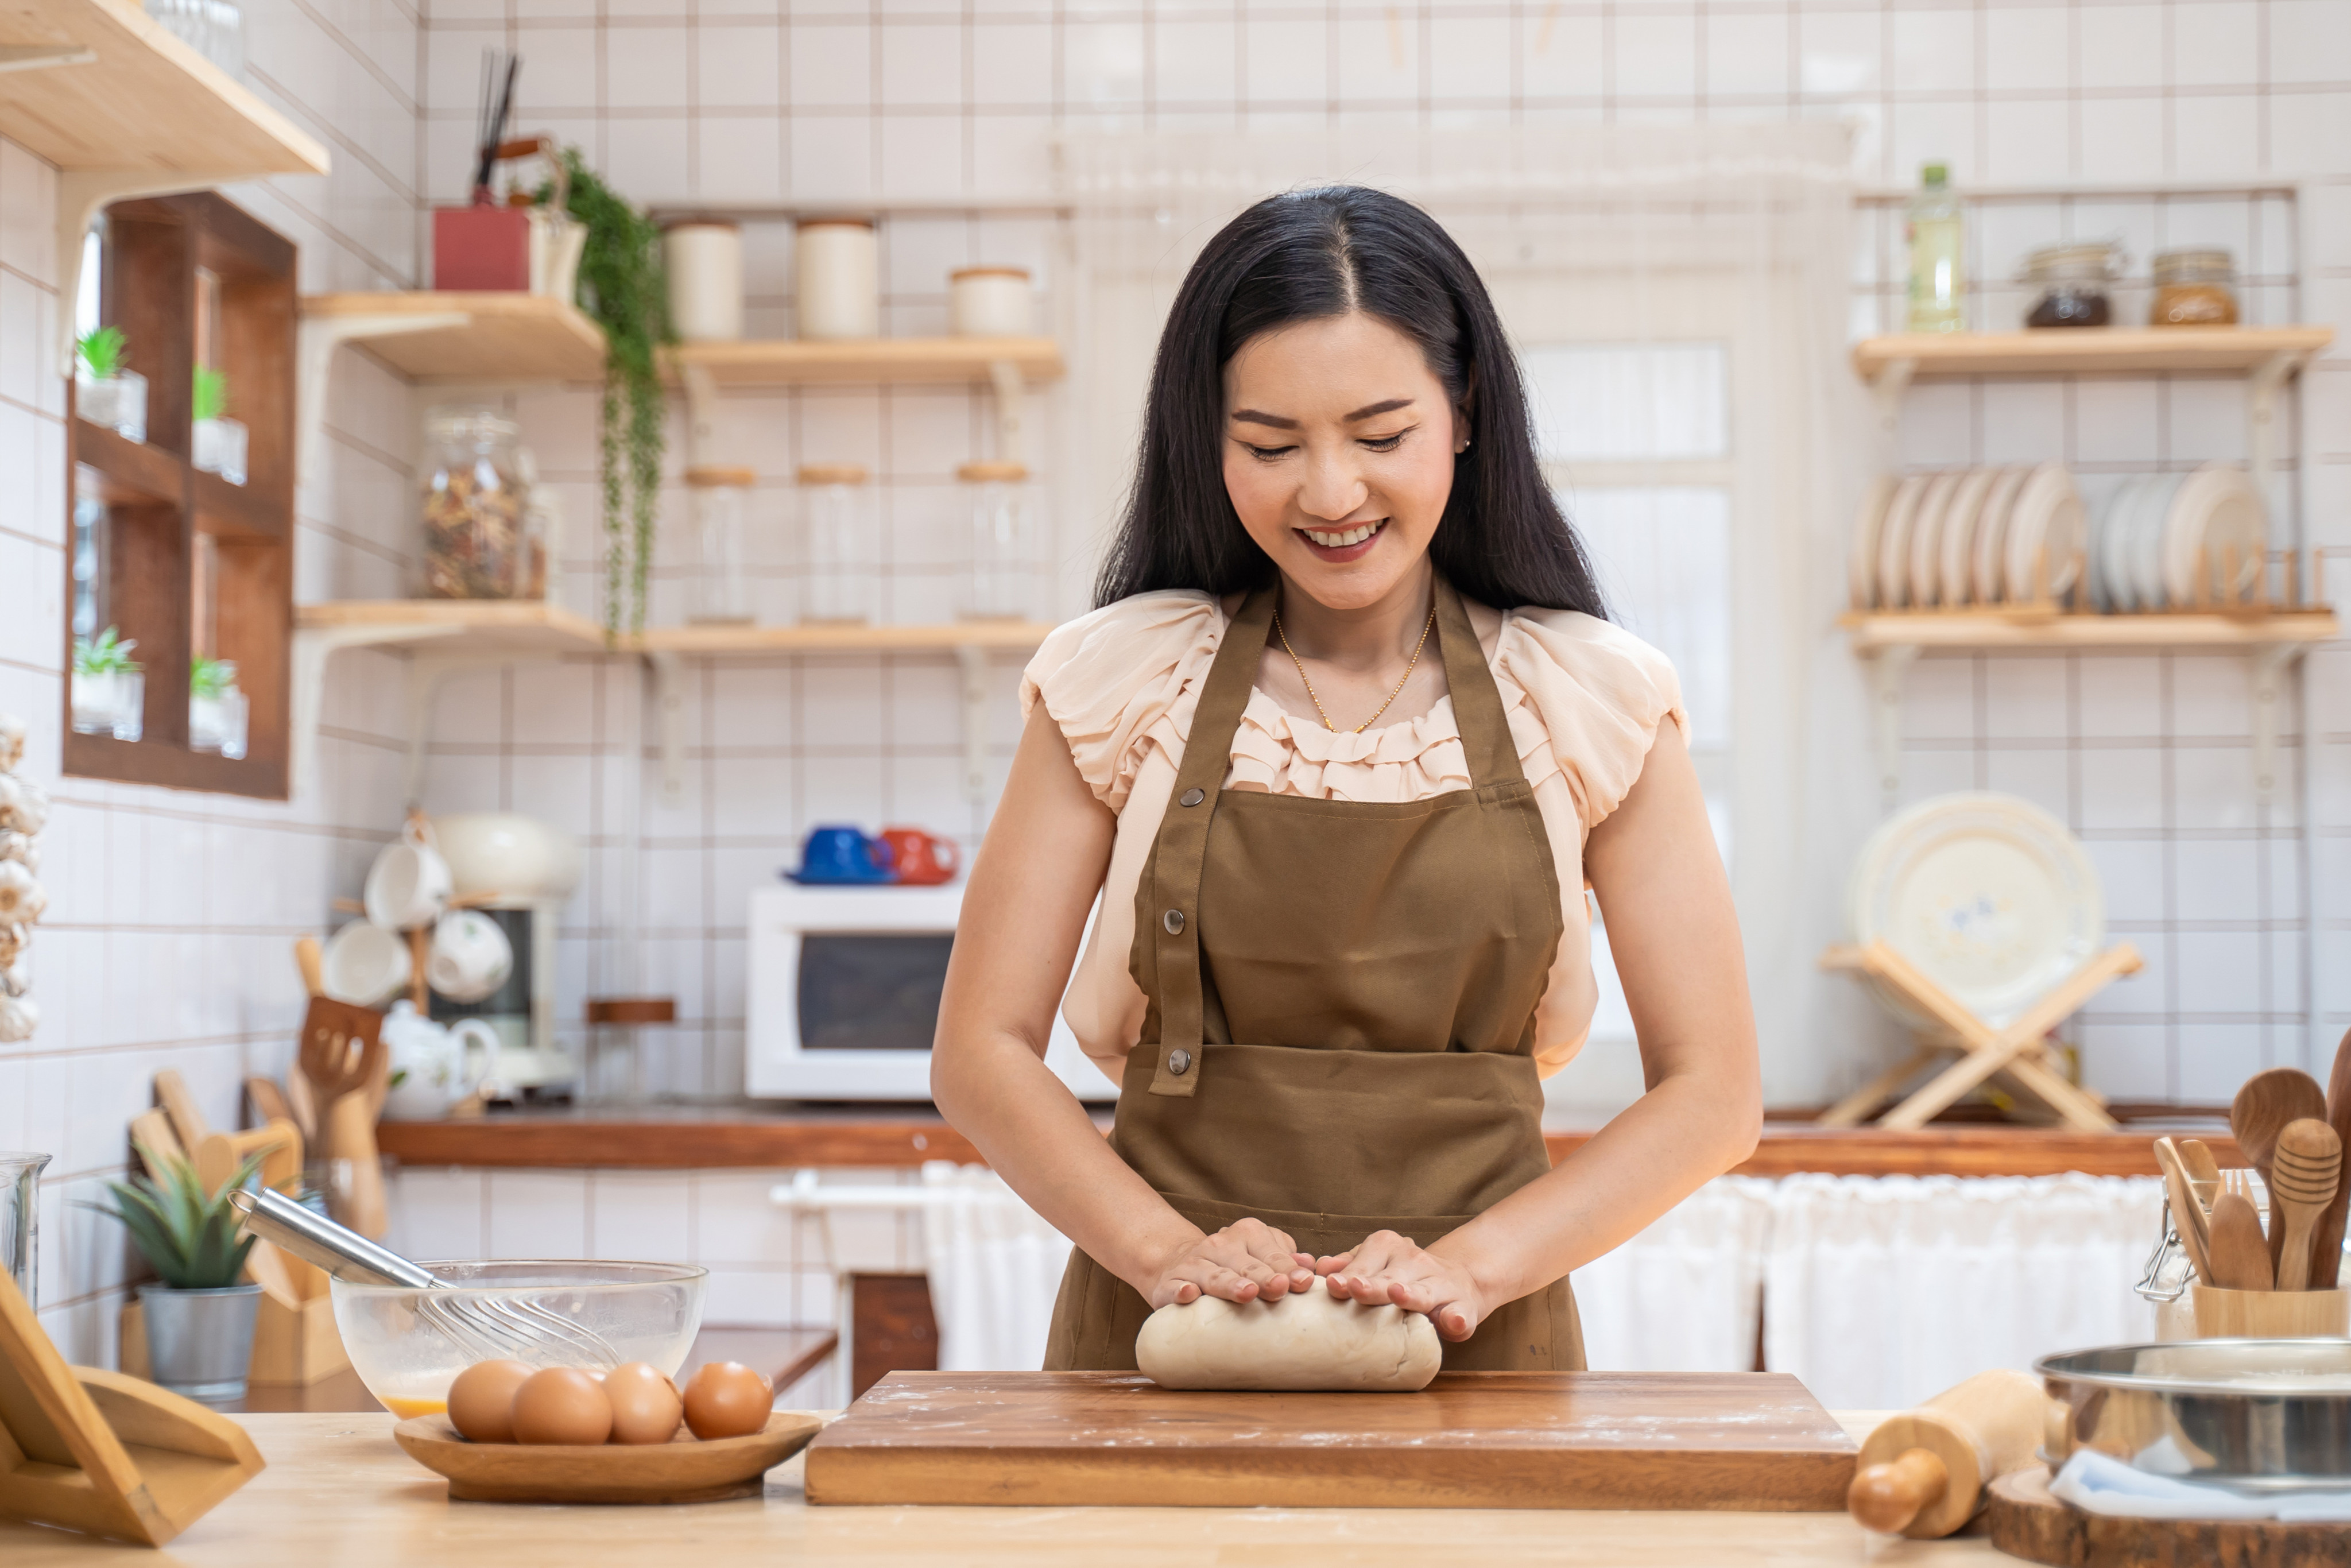 Baking at home is one way people might enjoy JOMO, or the joy of missing out. Photo: Shutterstock